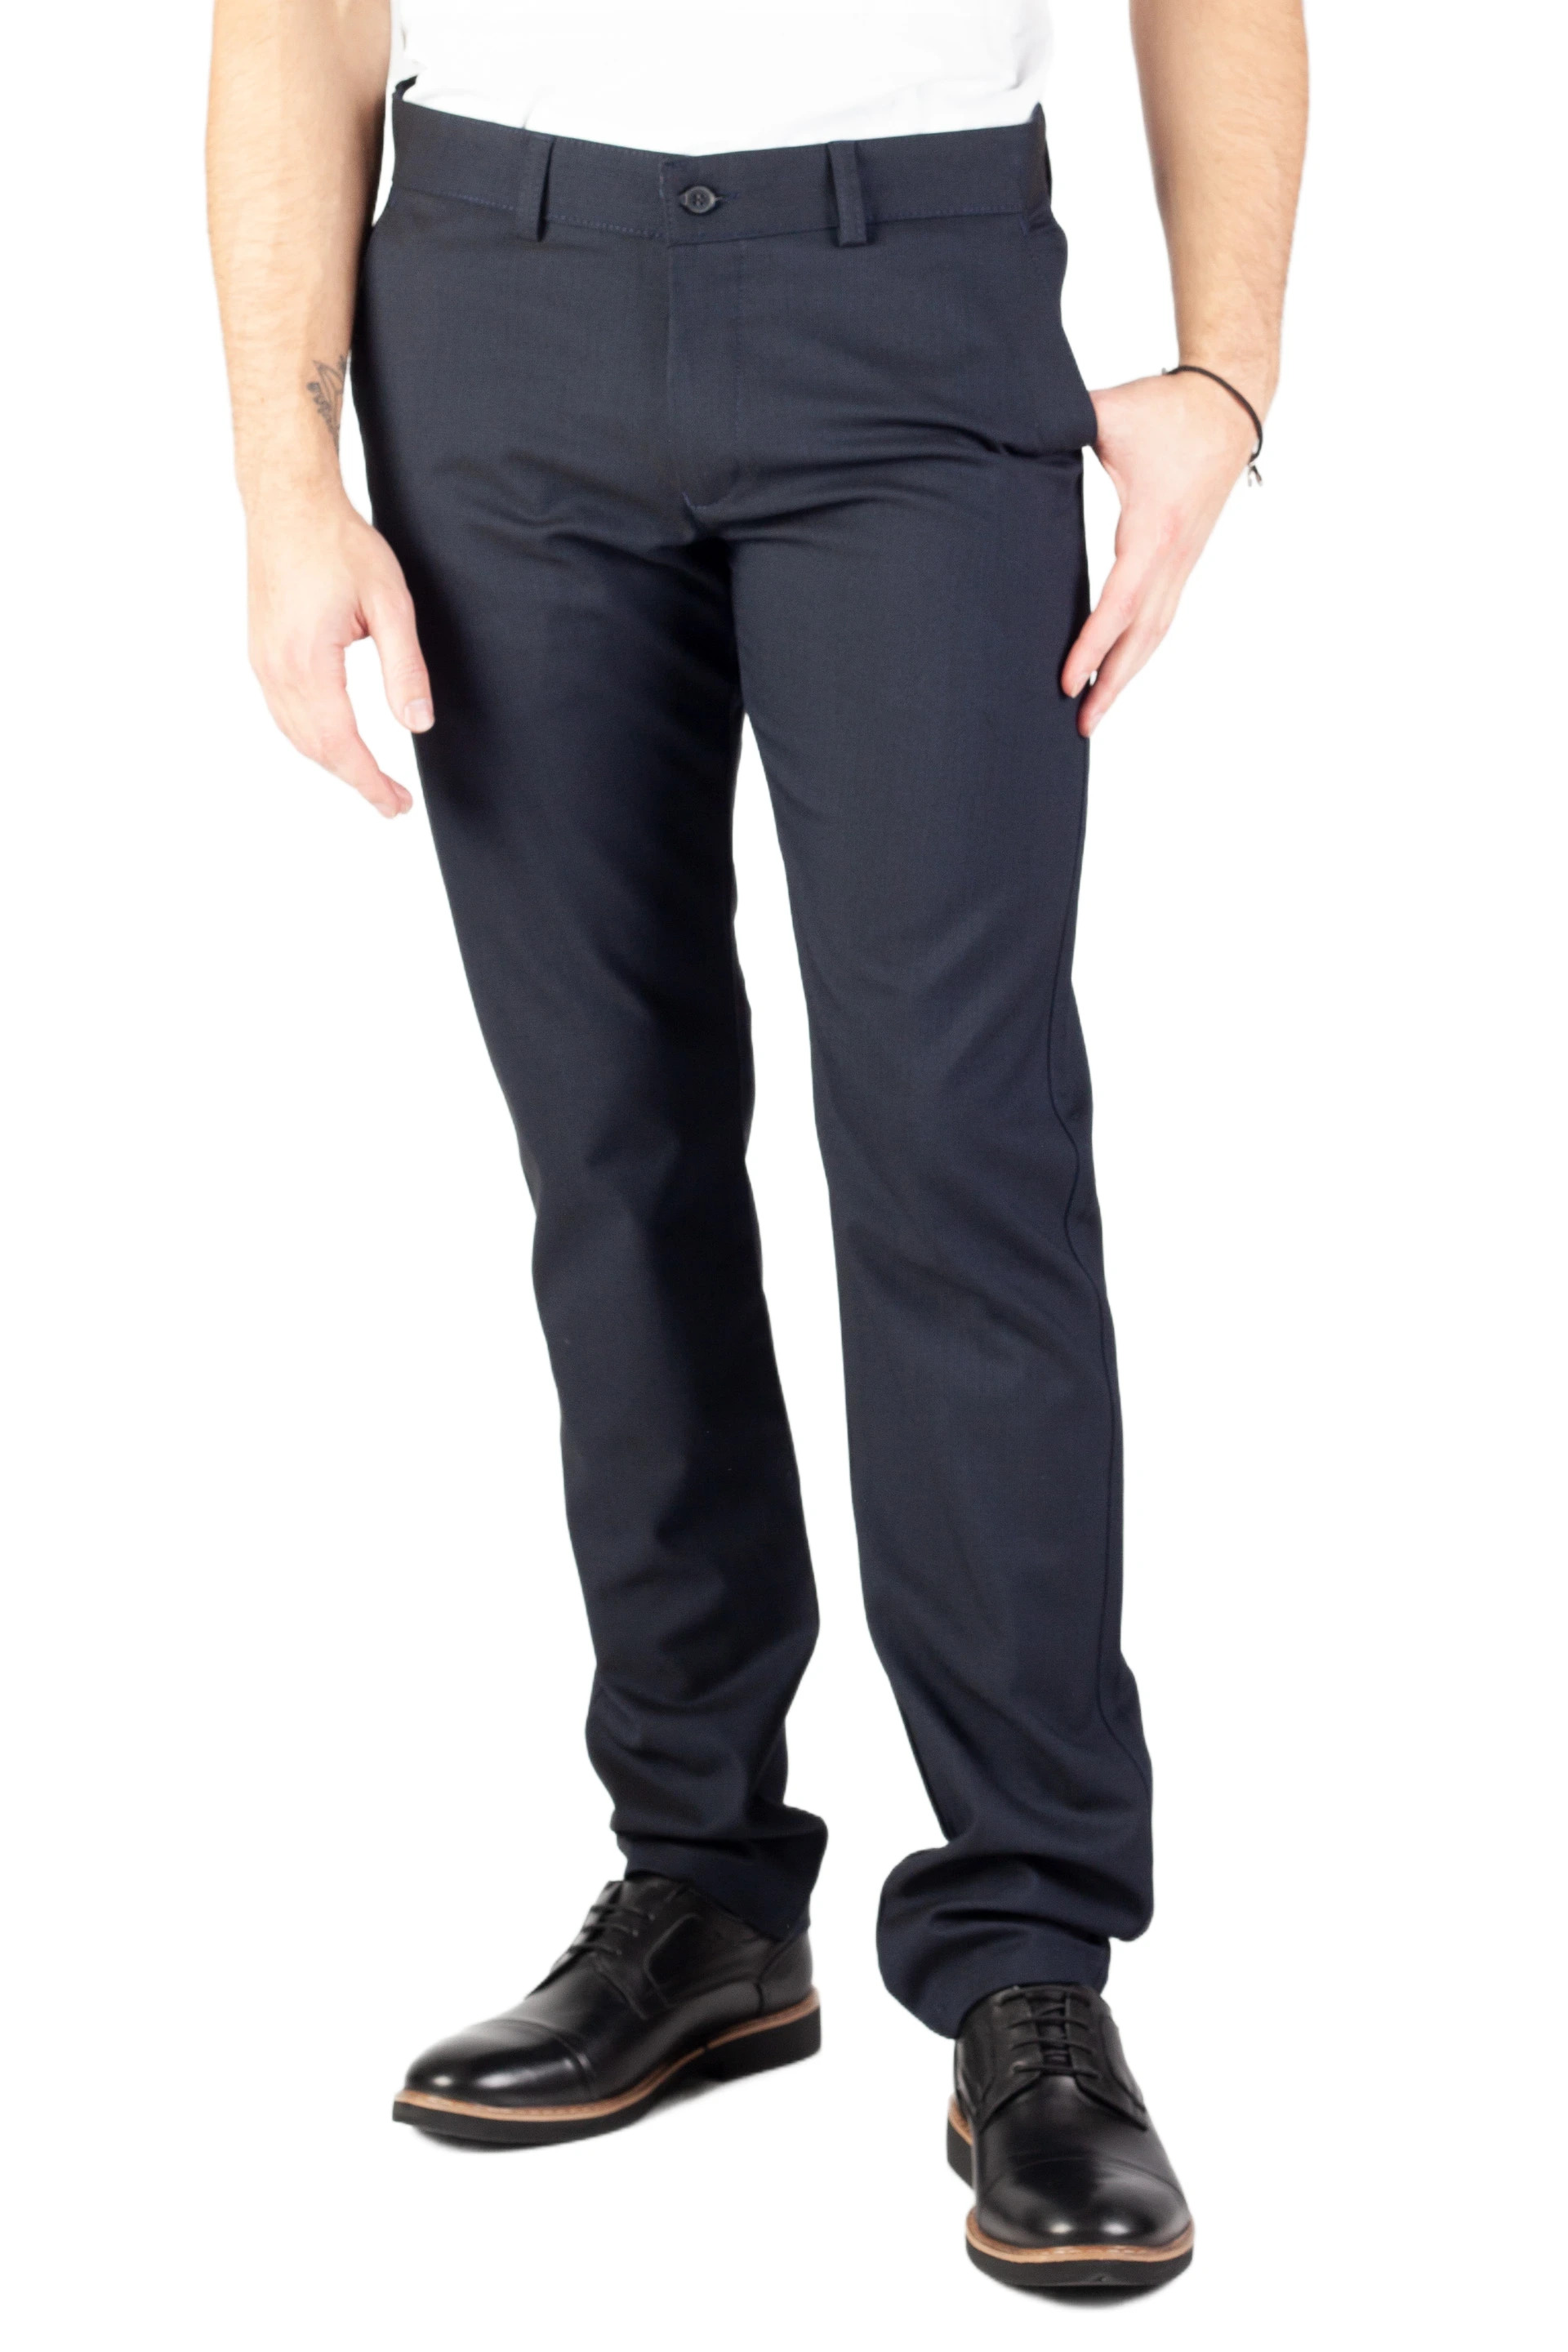 Chino pants BLK JEANS 8387-5161-104-201